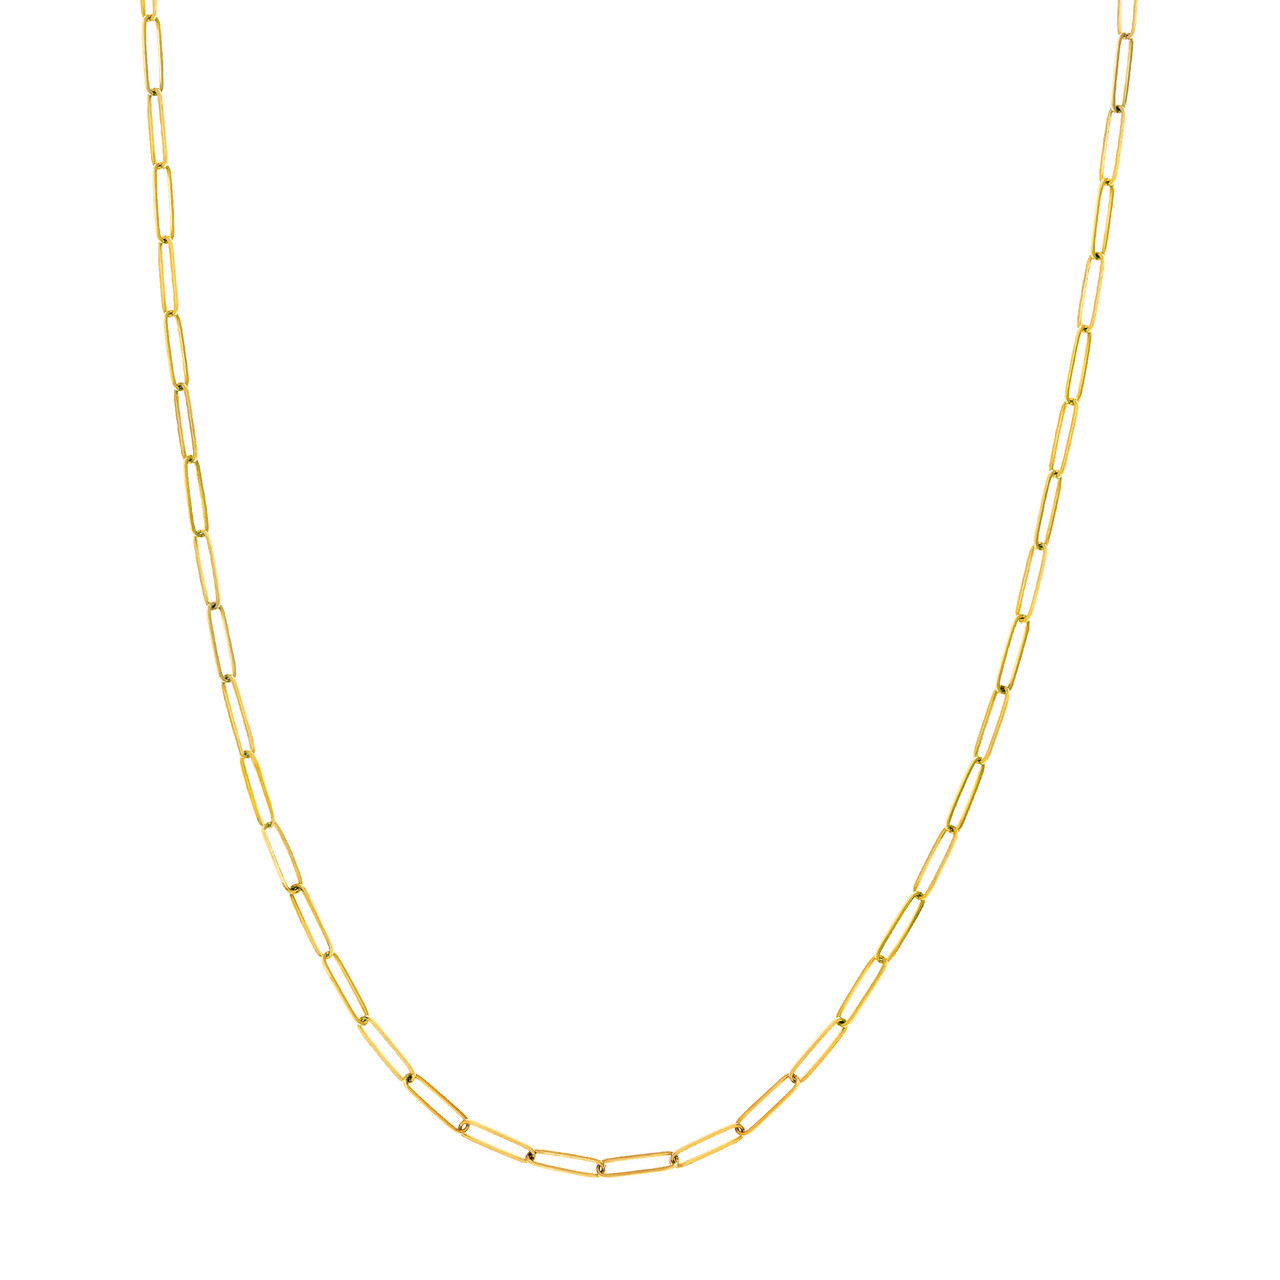 Yellow Gold Elongated Paperclip Chain Necklace 2.6mm l 16 inches